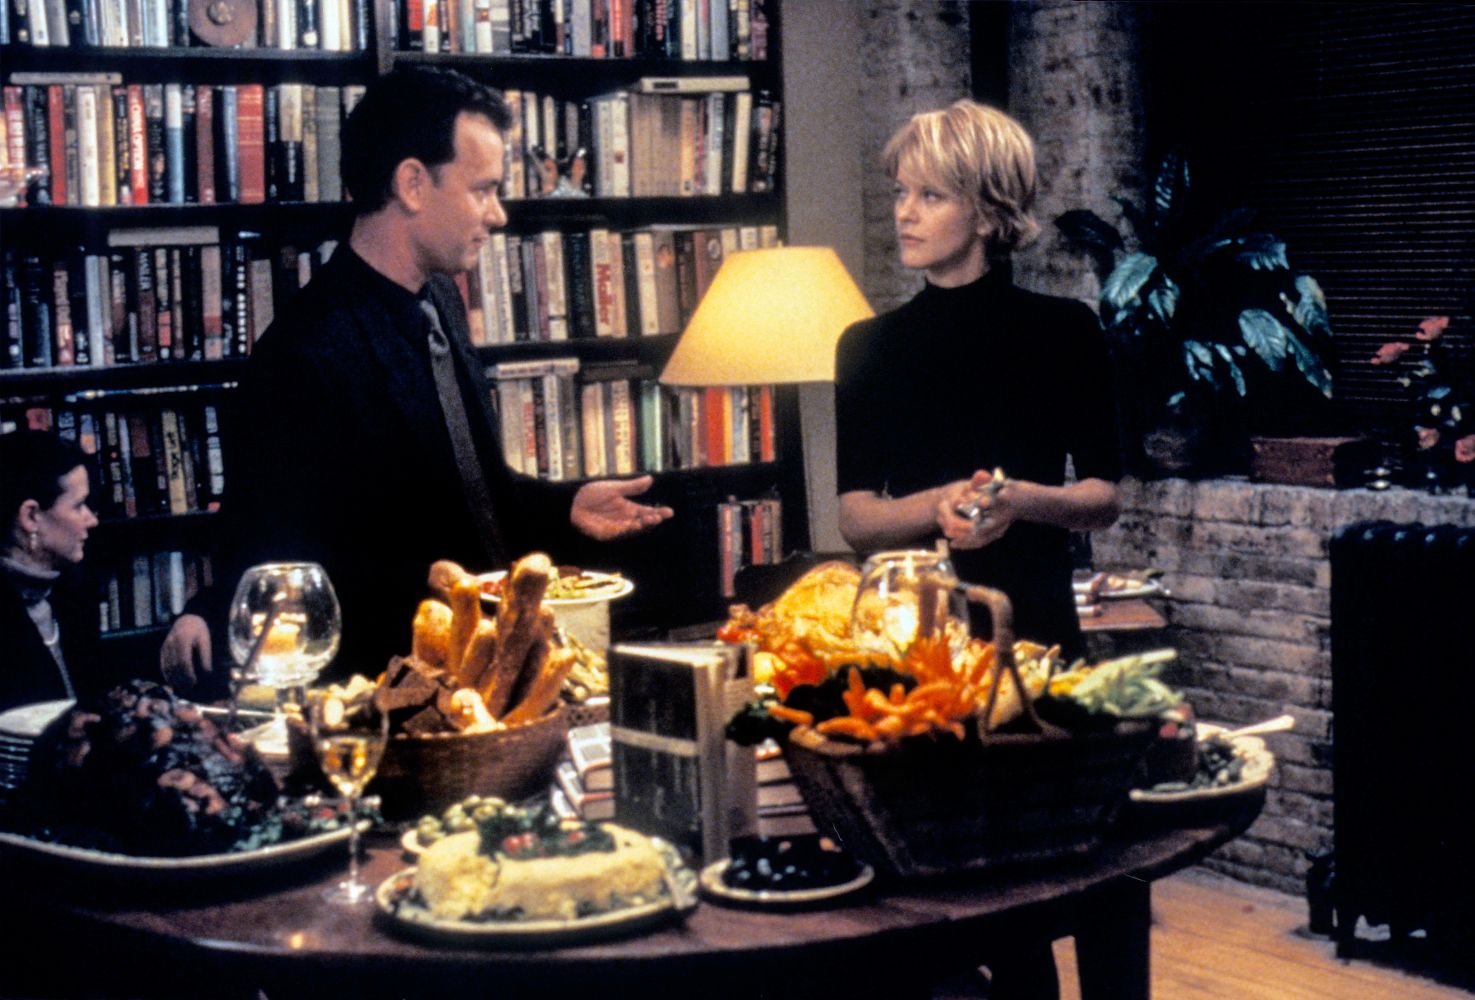 <p>Nora Ephron’s 1998 riff on ‘The Shop Around the Corner’ was the final onscreen pairing (so far!) of everyone’s favorite ’90s rom-com couple, Tom Hanks and Meg Ryan.</p> <p>The sweet film follows Ryan as an independent bookstore owner who develops an anonymous online romance with the corporate titan who is trying to drive her out of business. Even if the story is predictable and sentimental, the film remains a perfect slice of ’90s nostalgia and an unintentionally funny reminder of how quaint the internet used to be.</p>